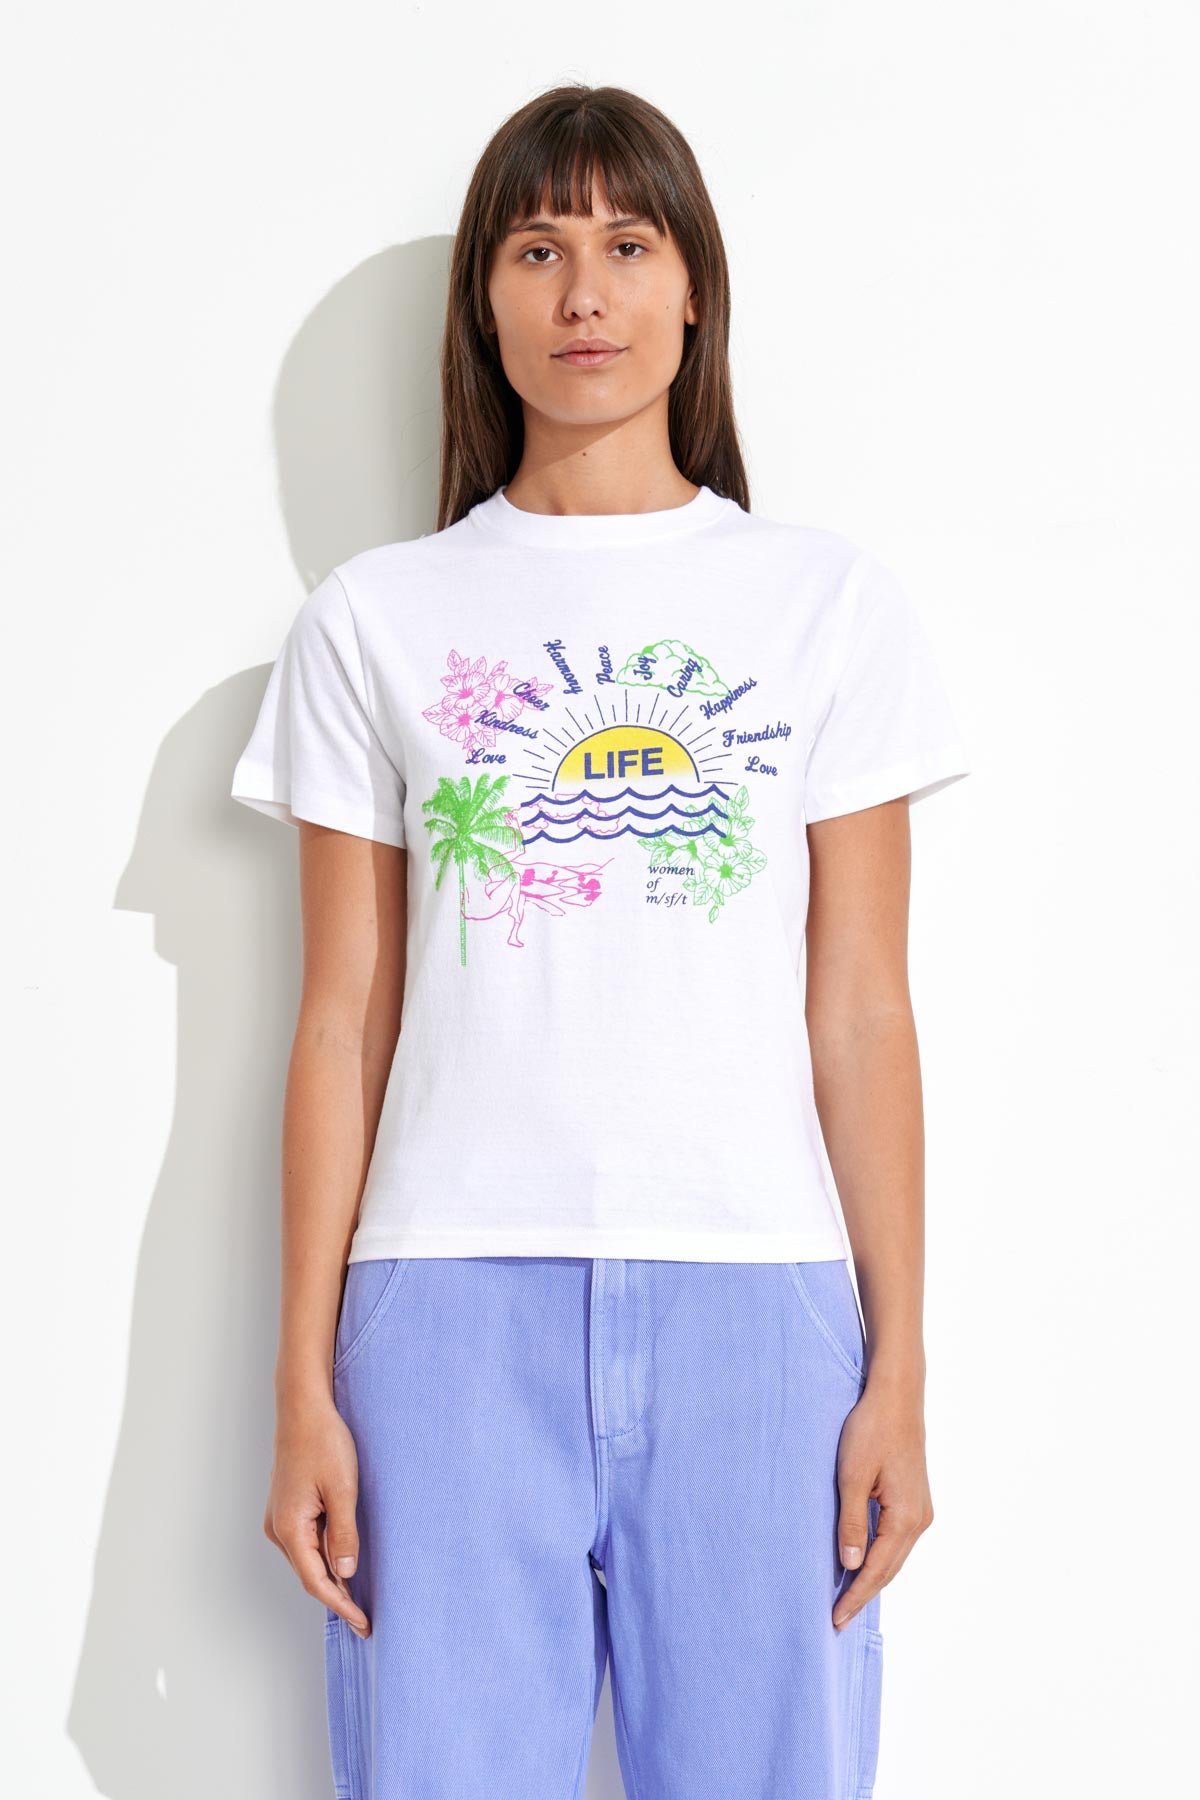 Misfit Shapes - Aries Sun Baby Tee - White